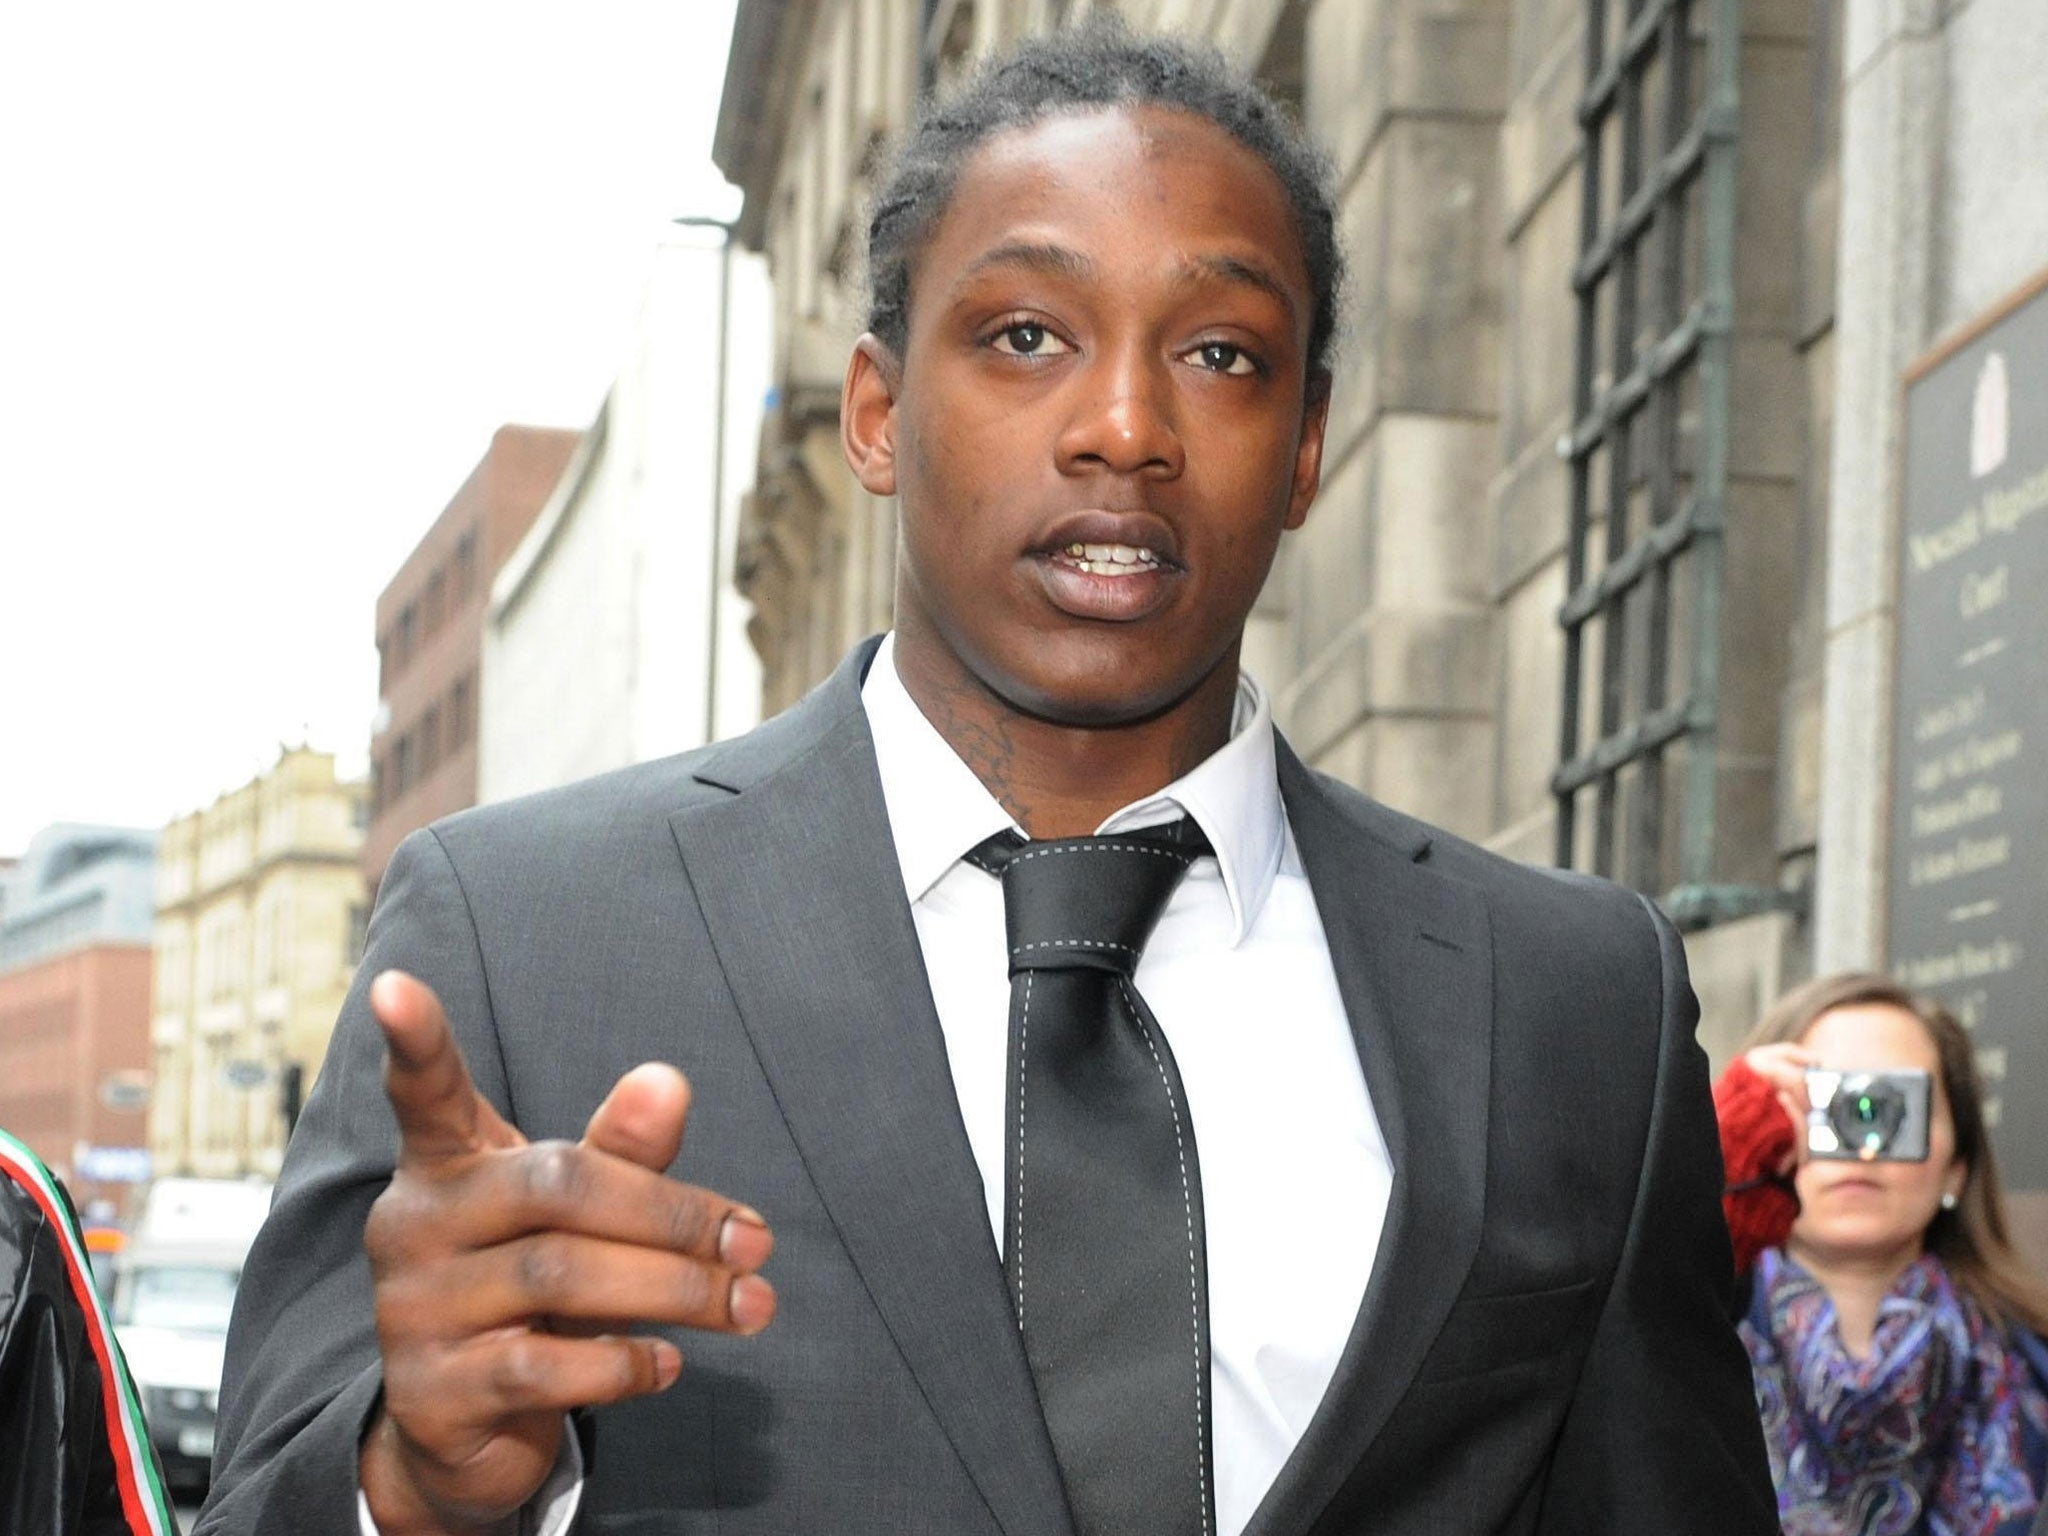 Nile Ranger sought by police for questioning in connection with the assault of a woman and criminal damage to flats